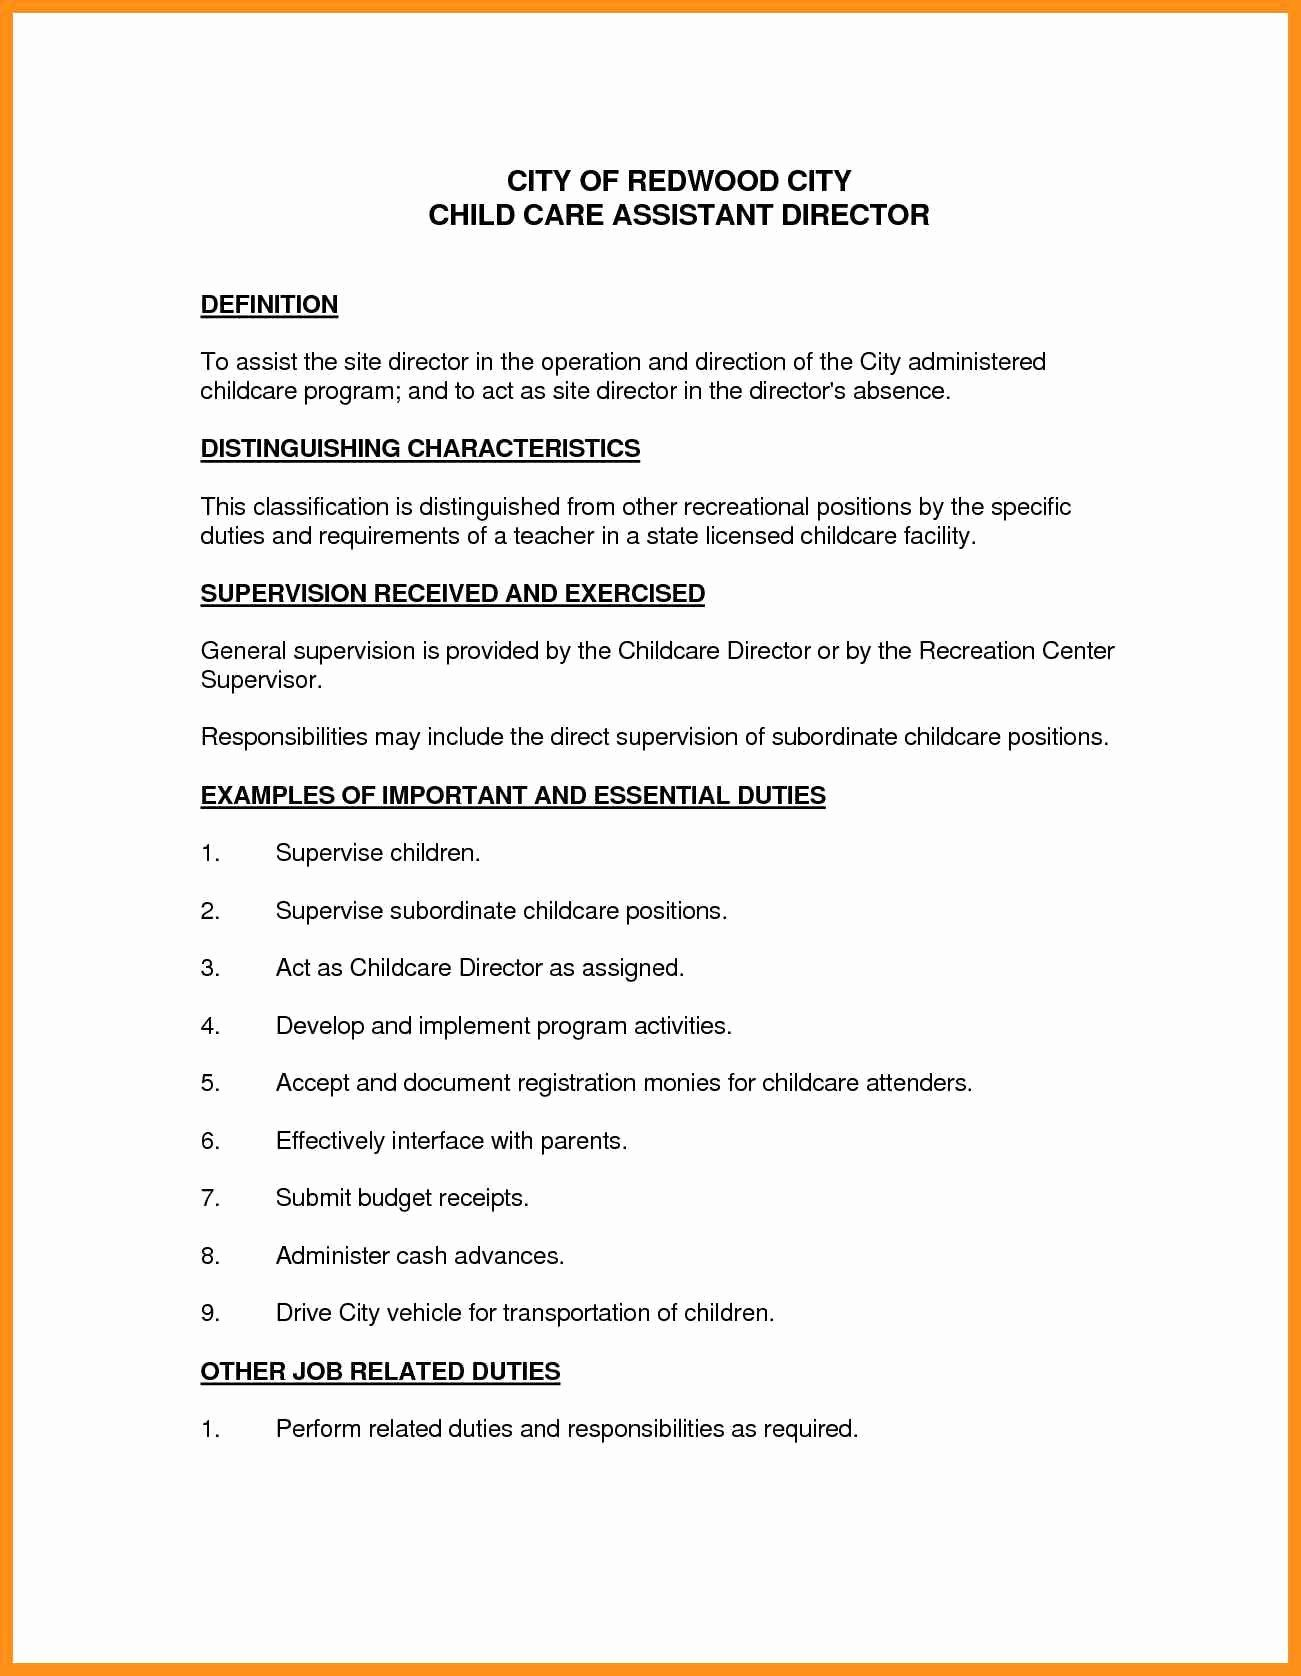 25 Child Care Resume Duties Job Resume Samples Resume for proportions 1301 X 1676